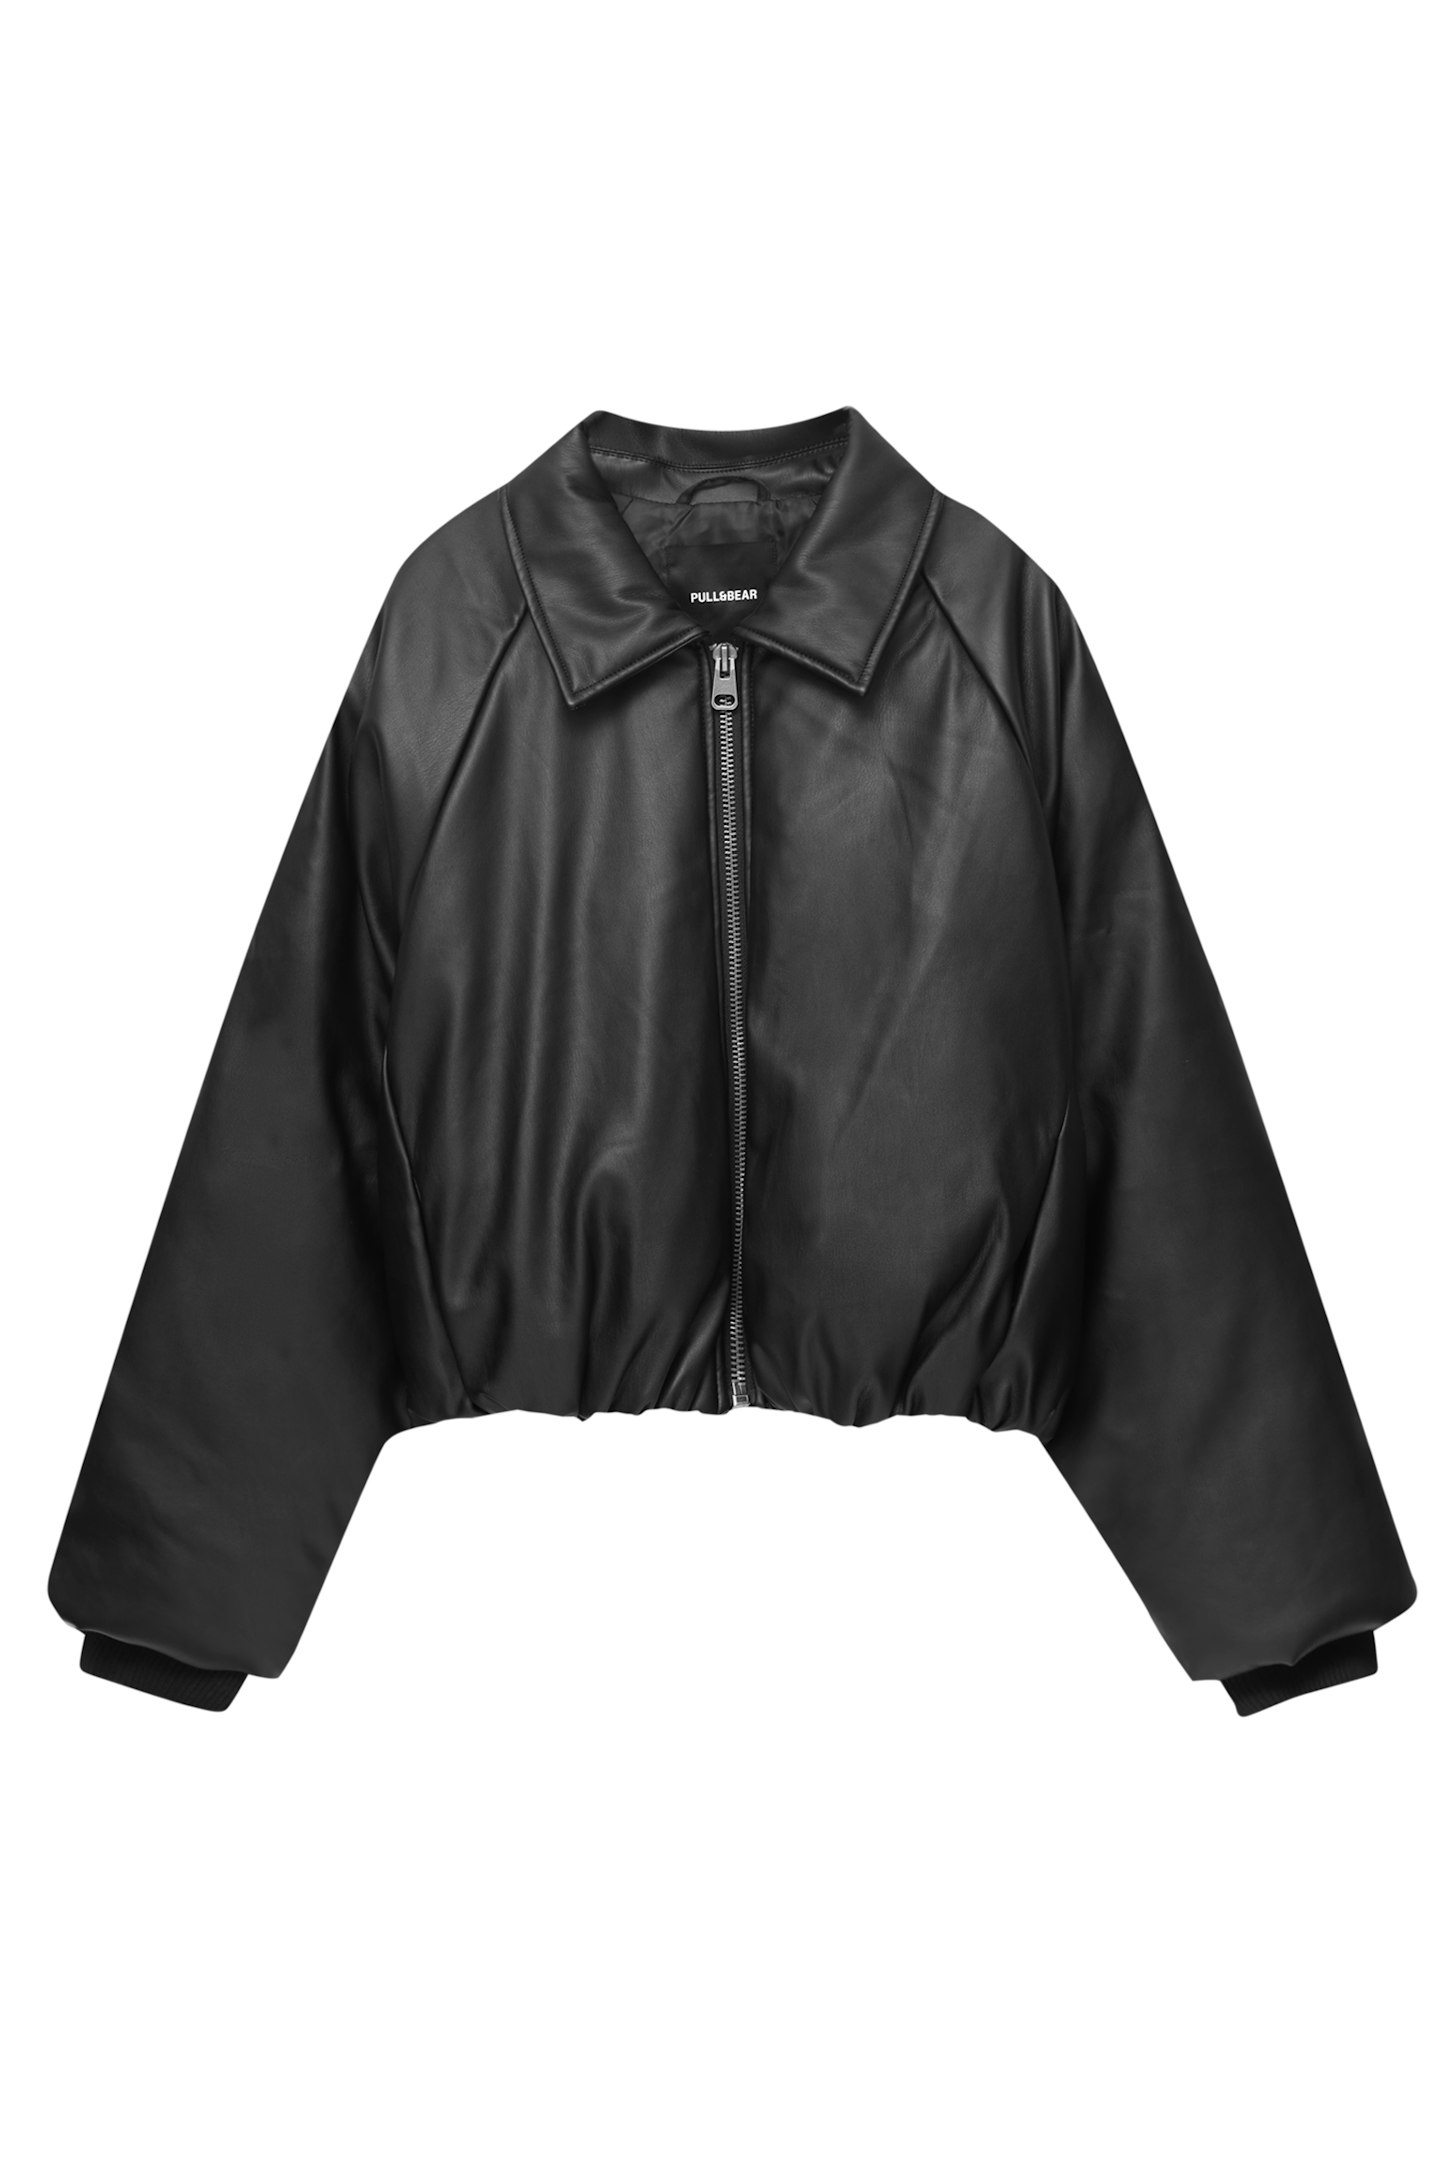 If you Love The Viral £650 Acne Studios Bomber, We've Found A Similar ...